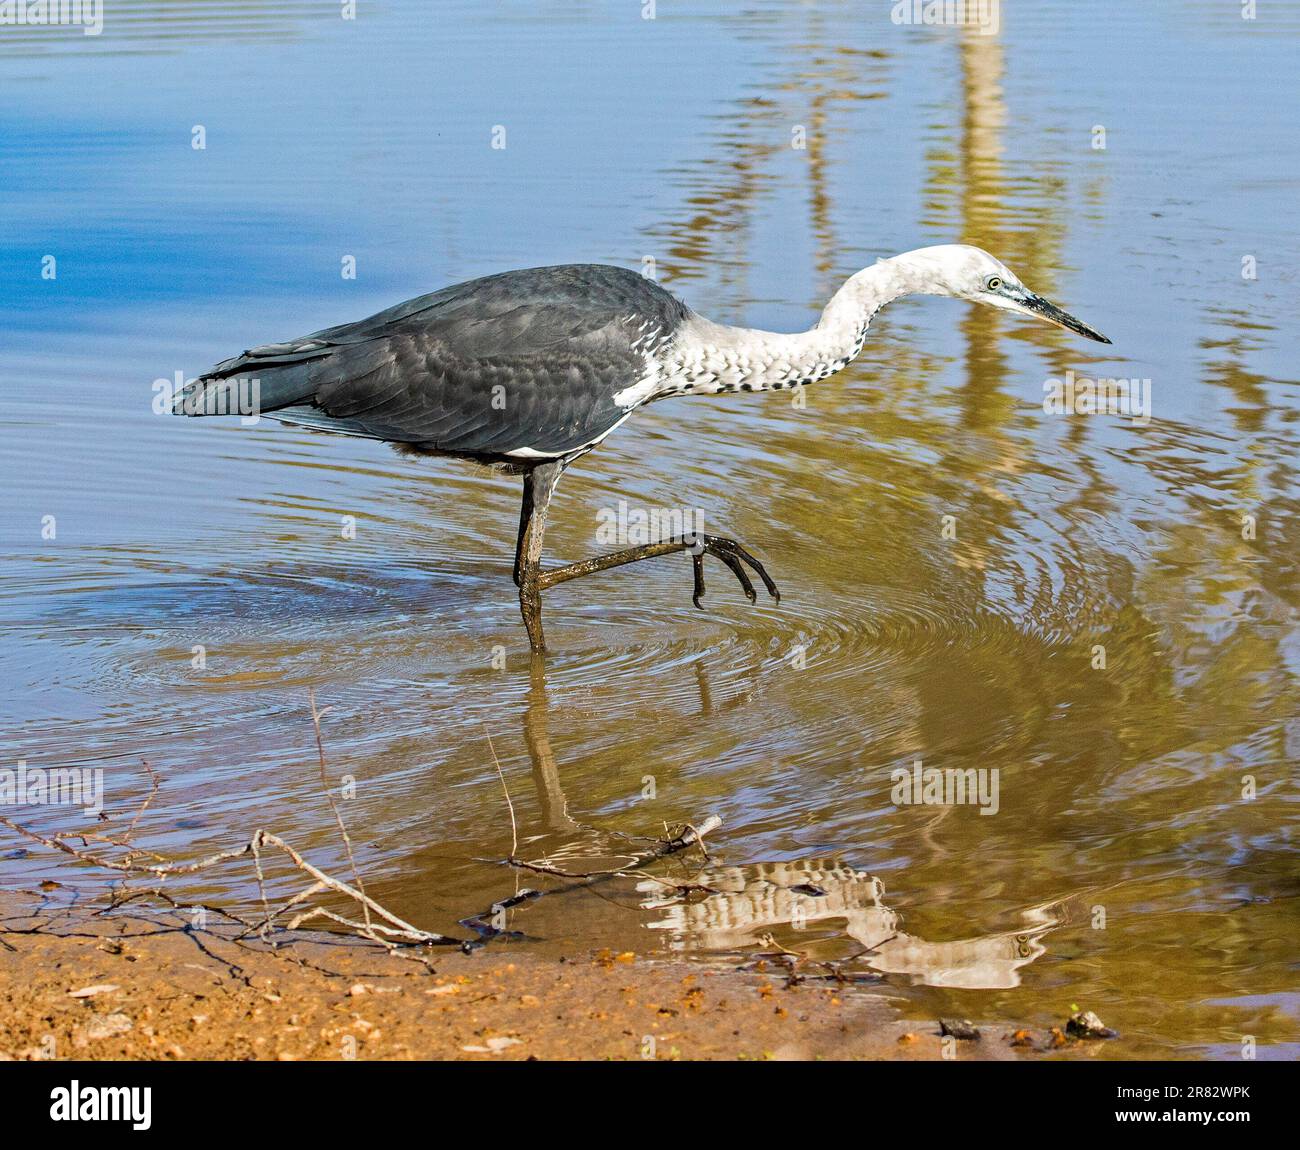 White-necked / Pacific Heron, Ardea pacifica, large bird wading and reflected in blue water of waterhole in outback Australia Stock Photo